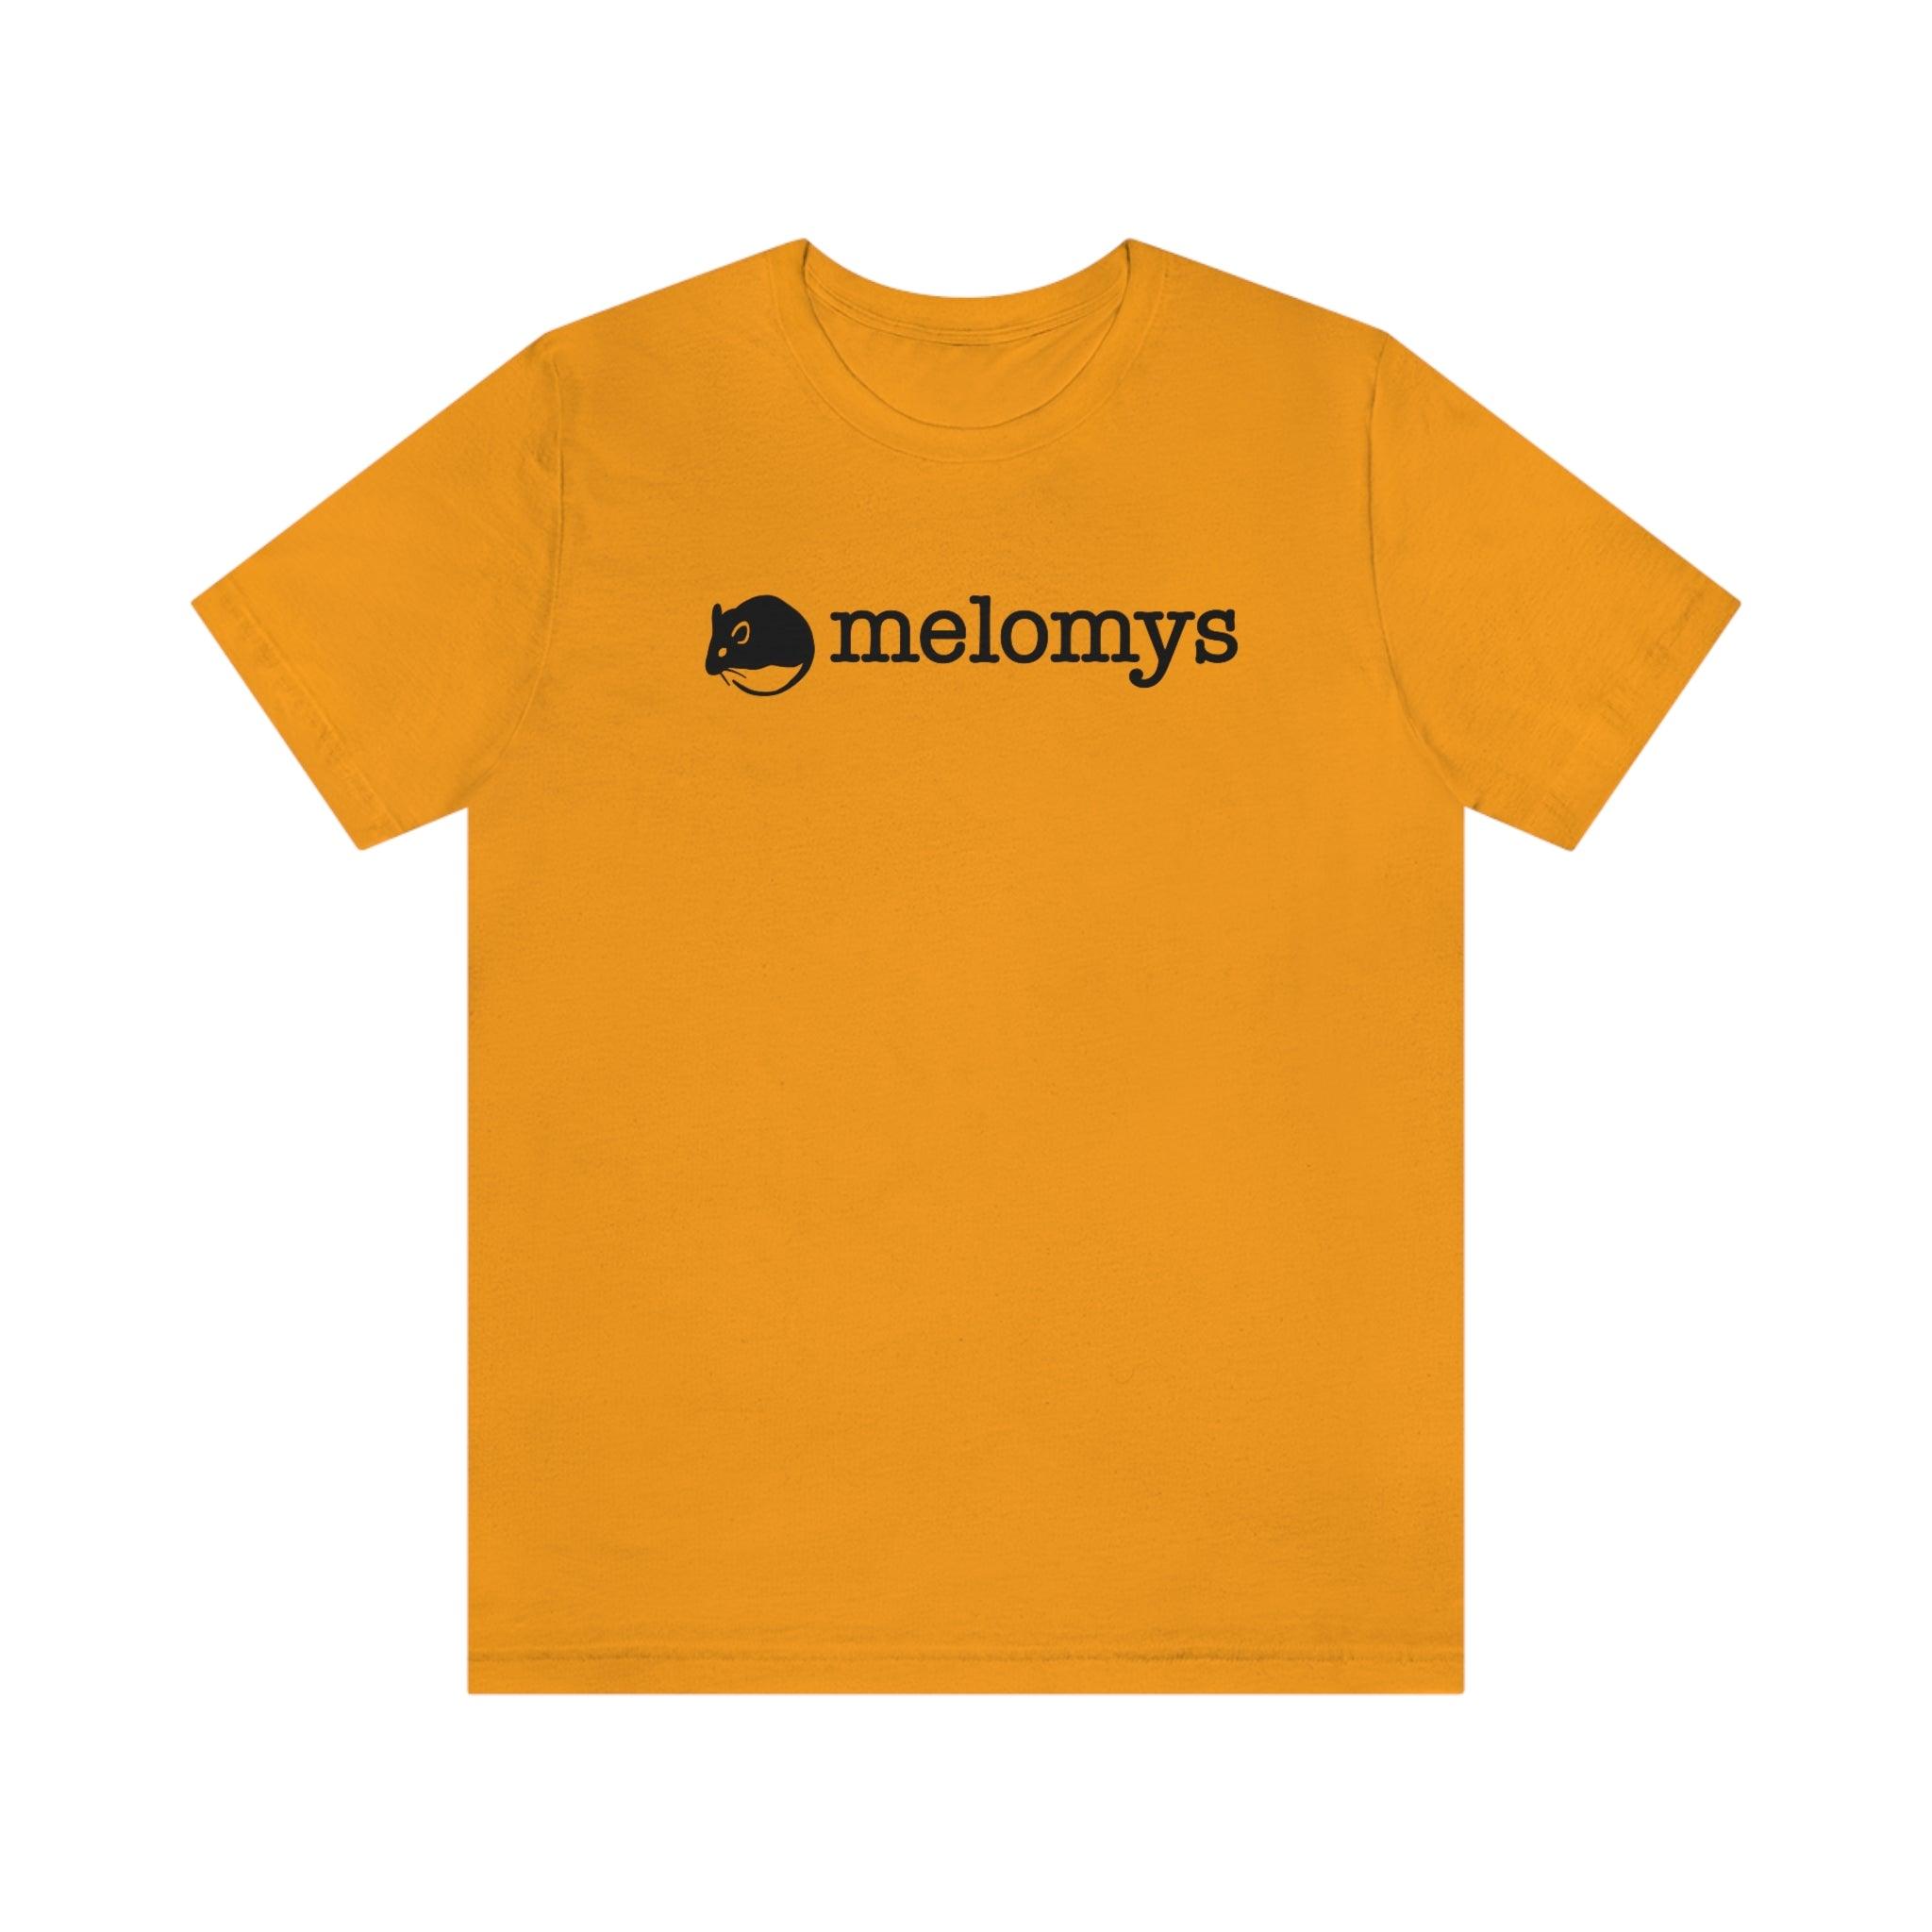 Melomys "Keep The Seas Plastic Free" 100% Cotton Jersey Short Sleeve T-Shirt - Melomys